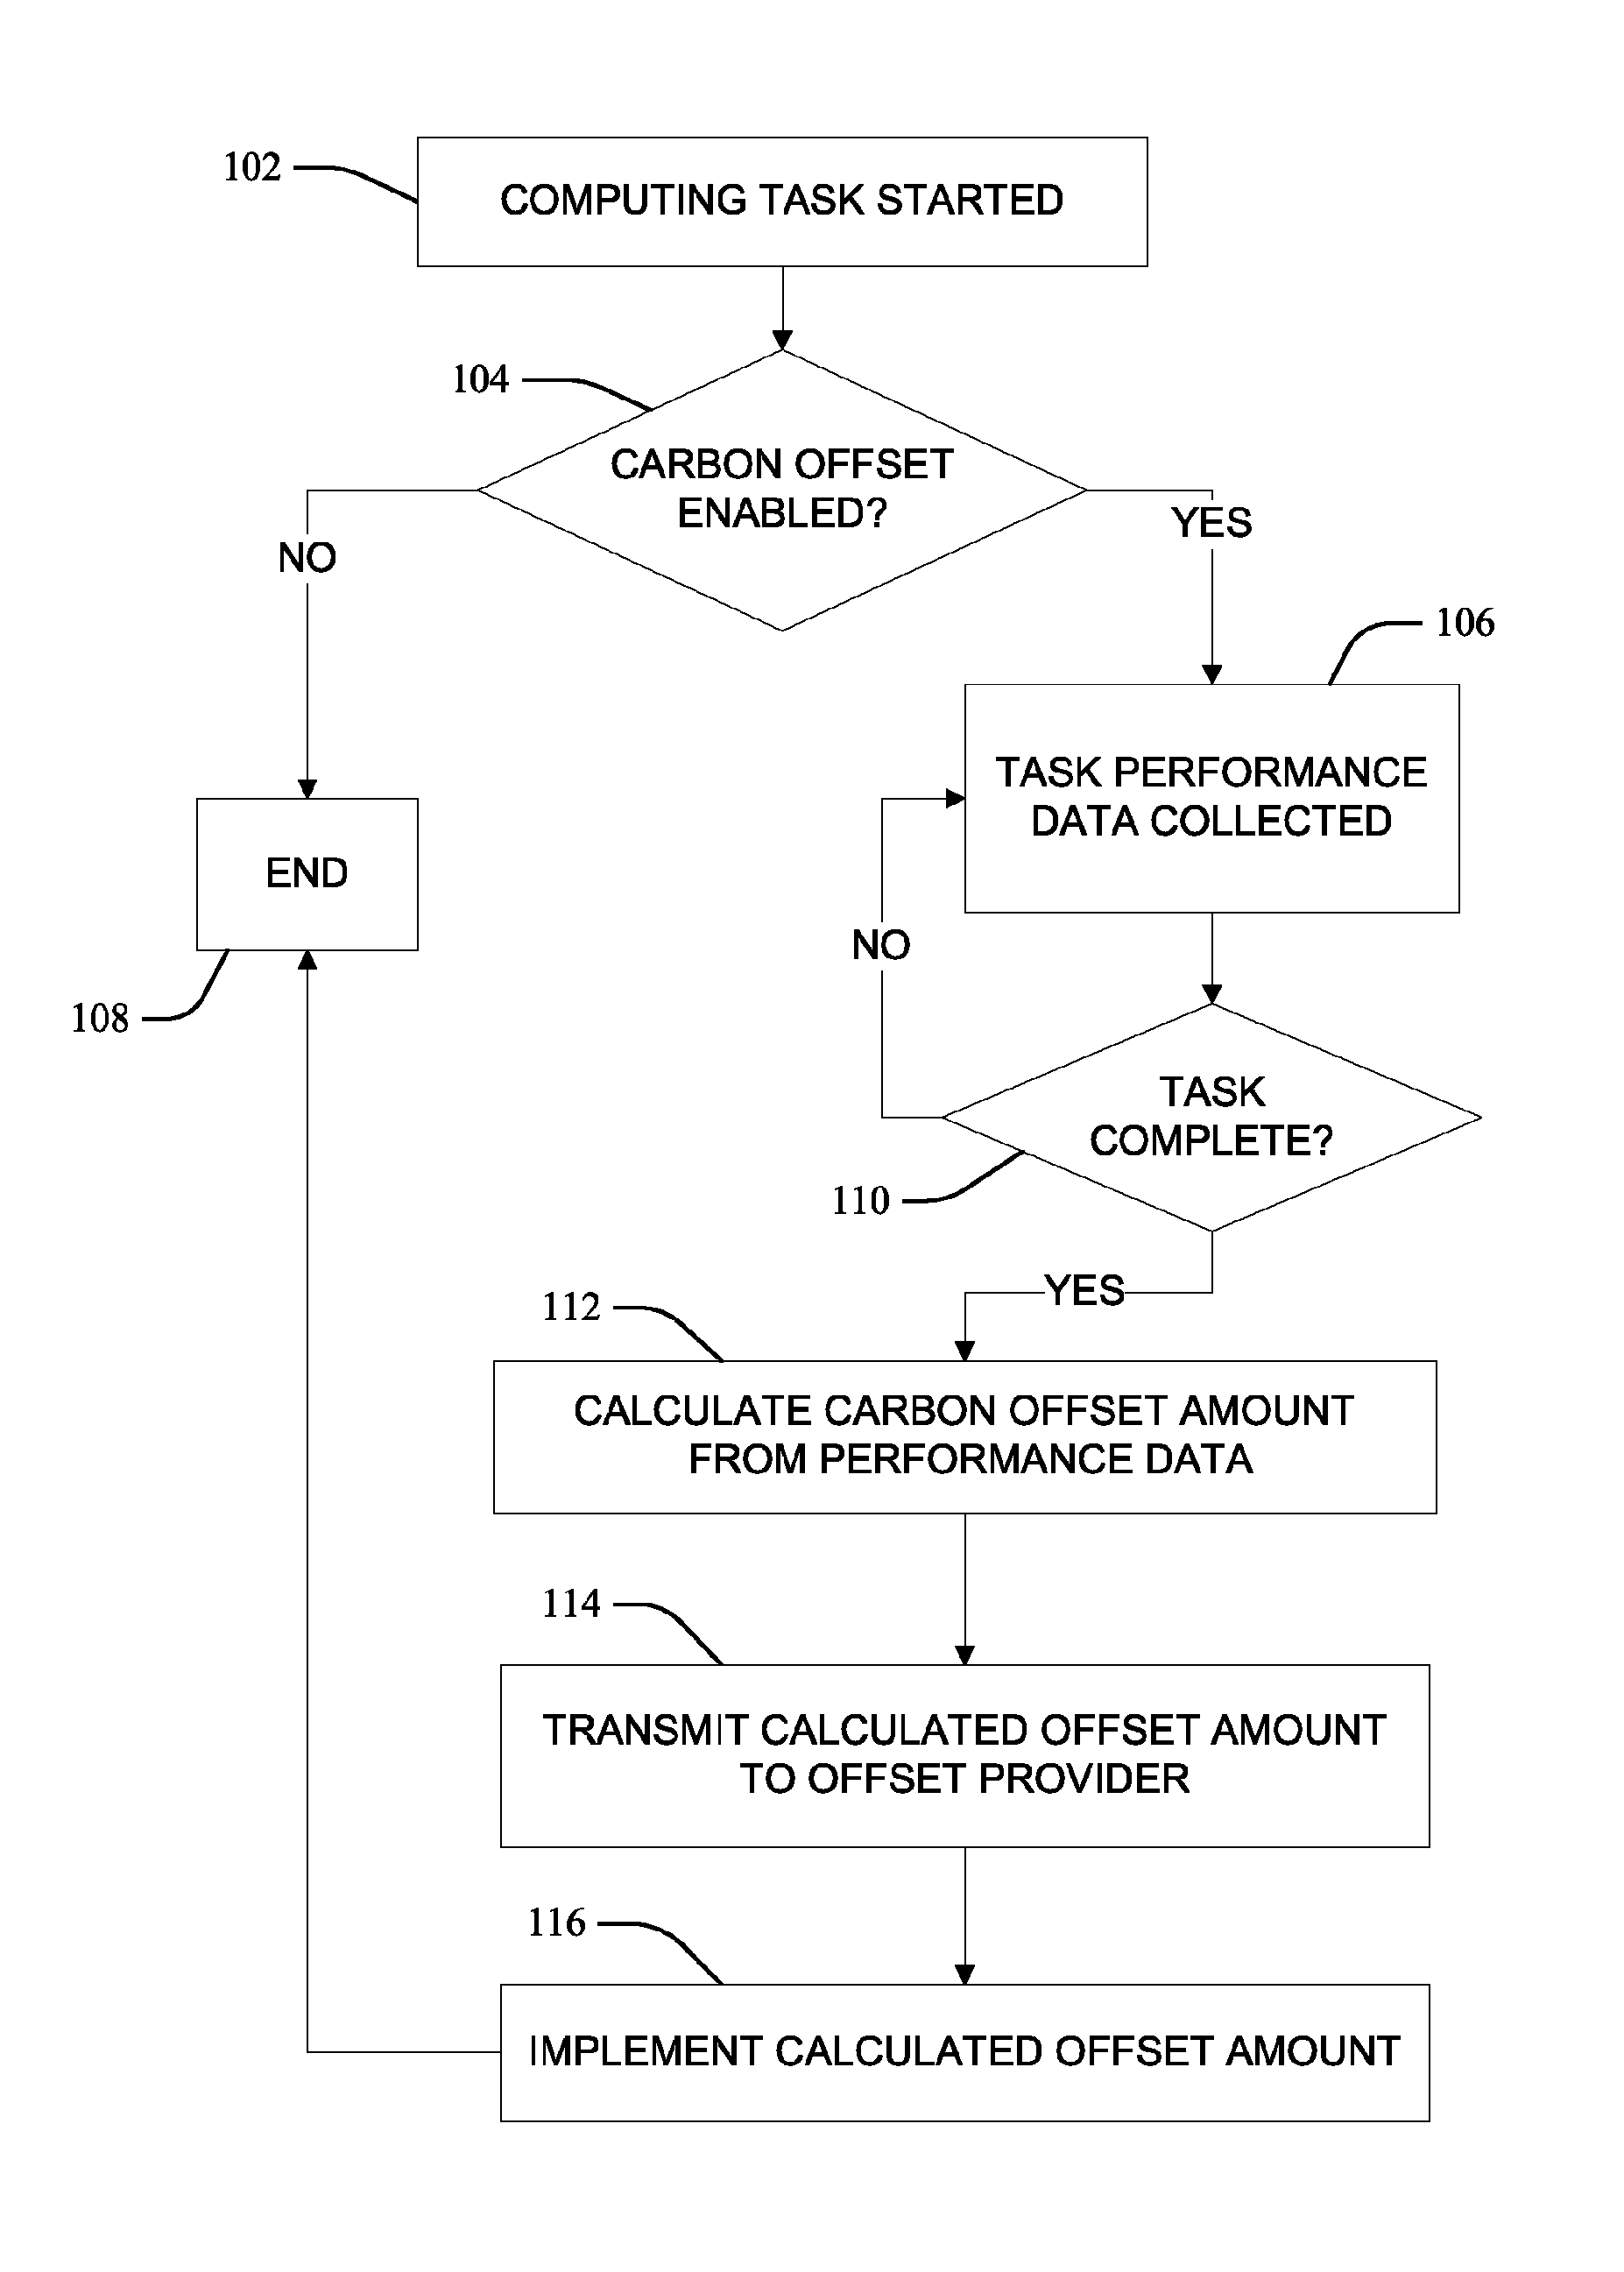 Calculating and communicating level of carbon offsetting required to compensate for performing a computing task